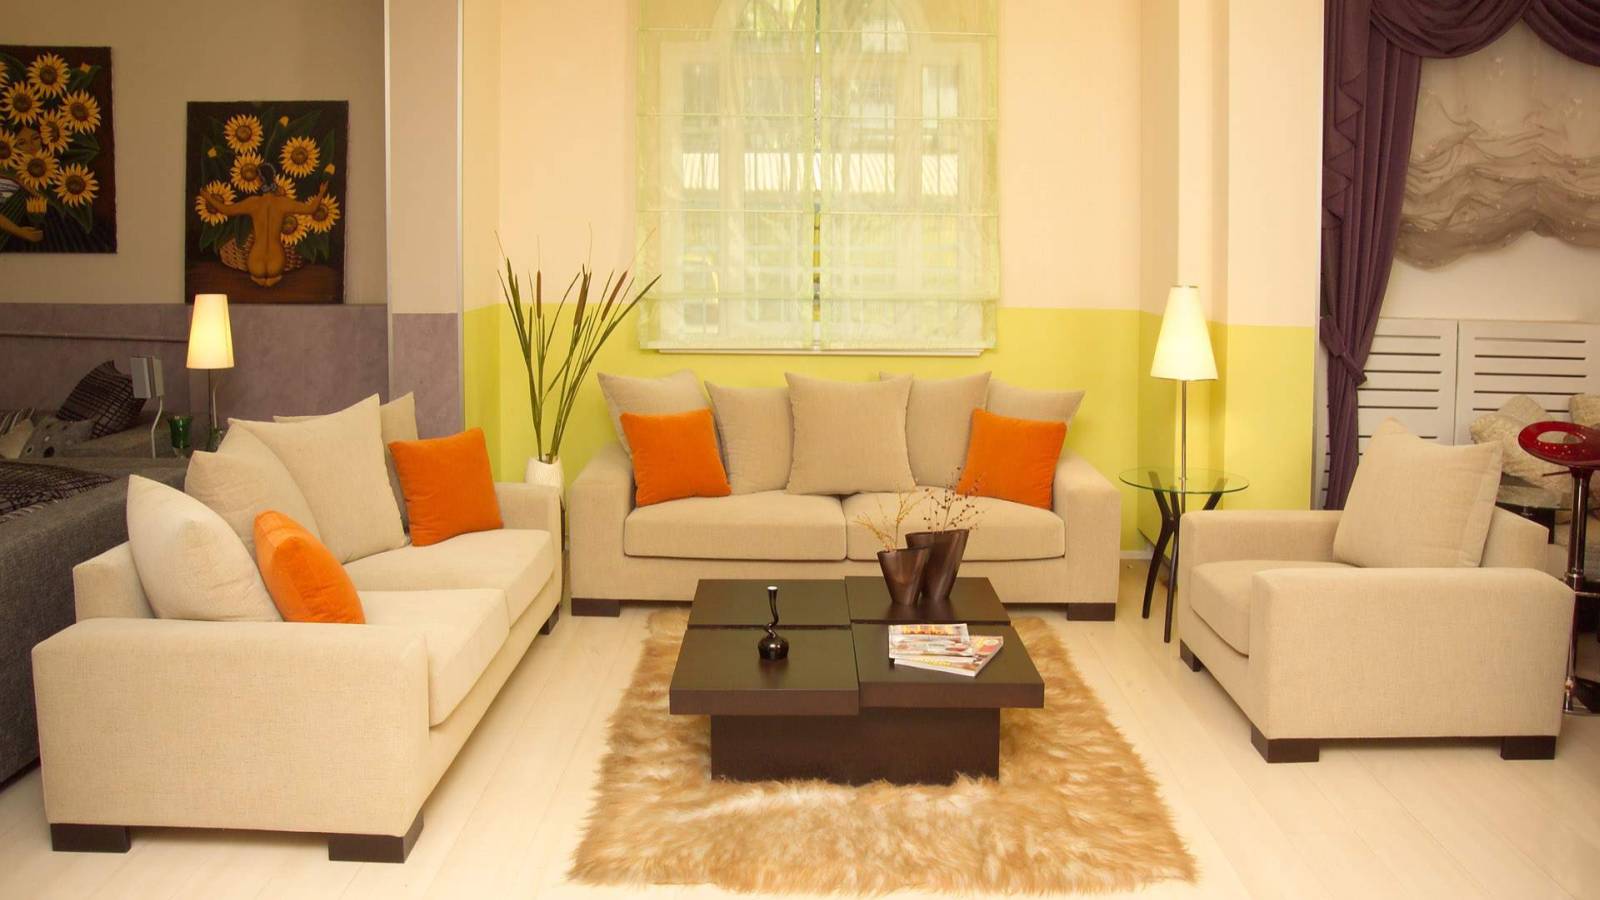 How to Prepare Your Living Room for Guests